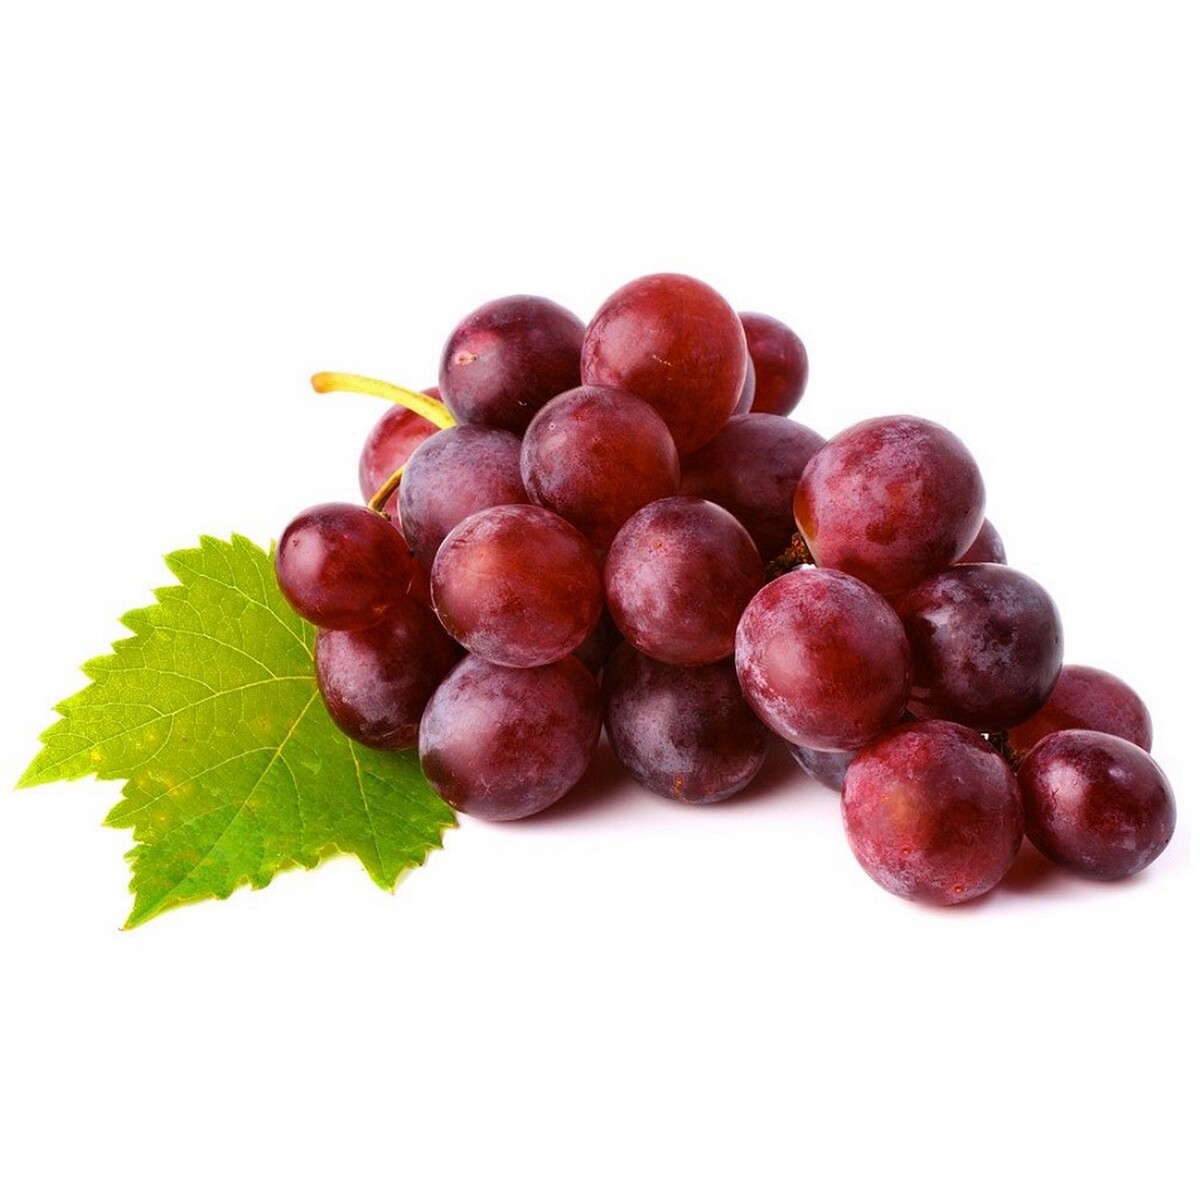 Grapes Red Globe Imported Approx. 250gm